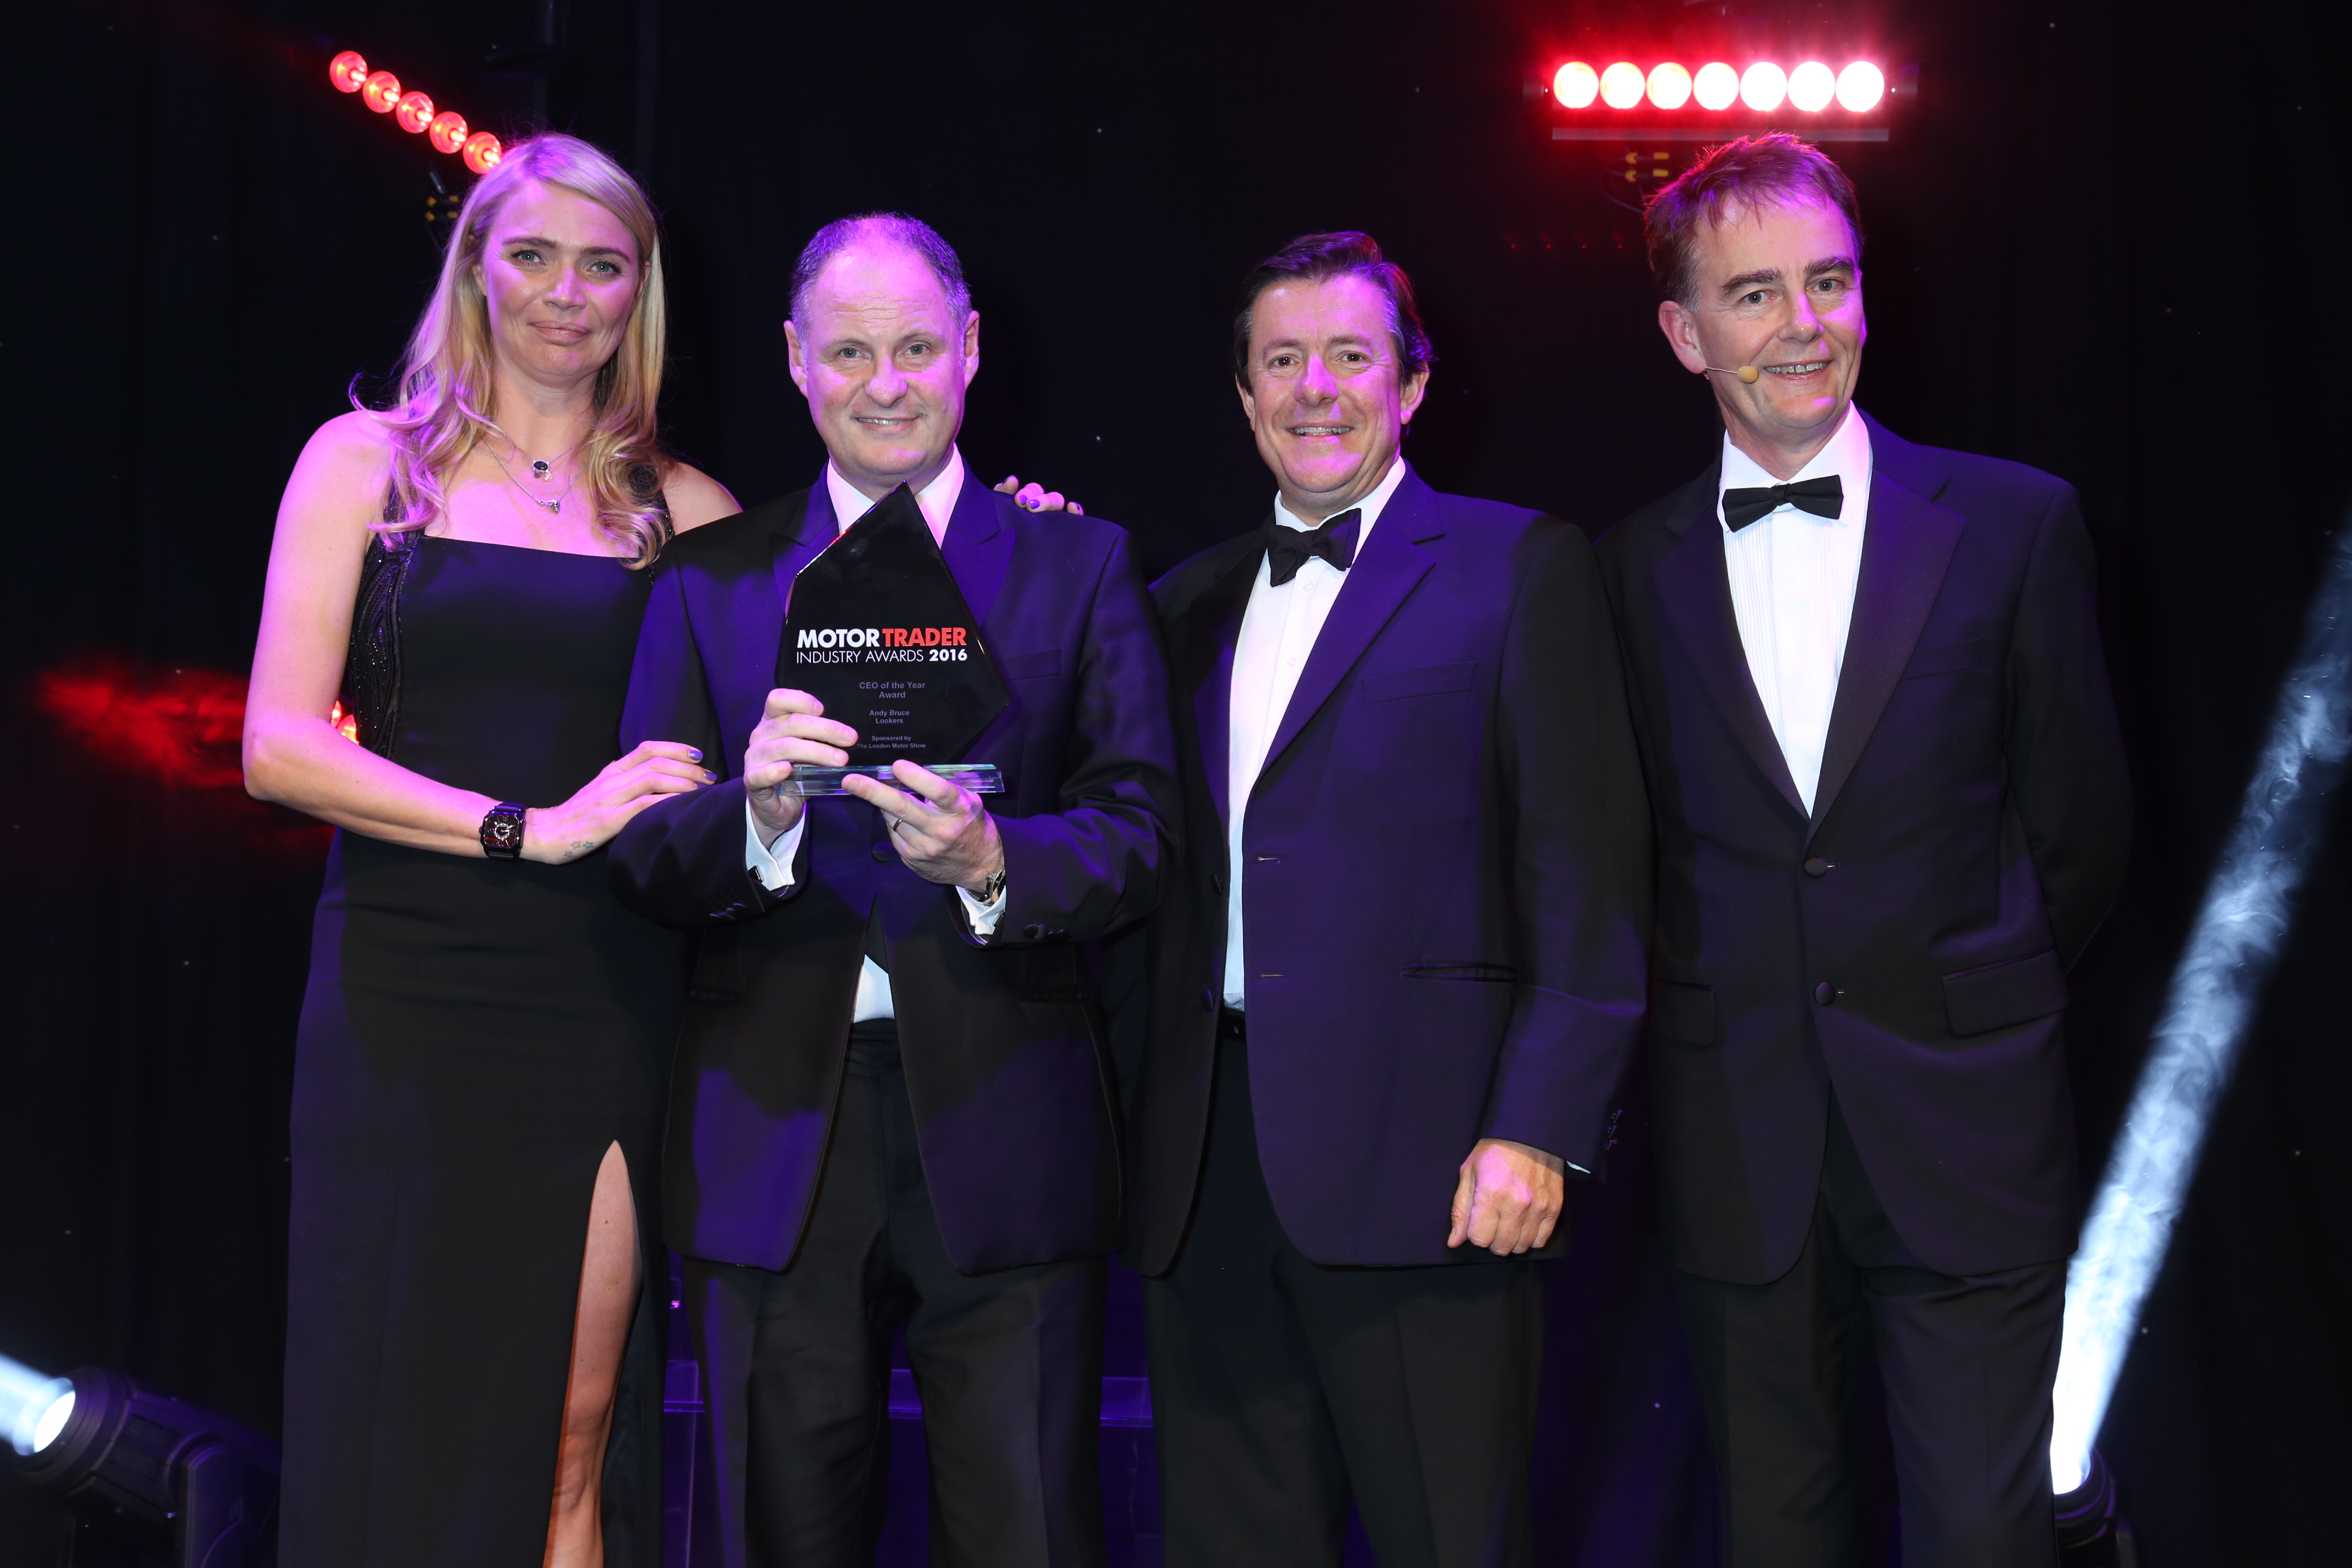 Andy Bruce, Lookers CEO receiving the Award from Jodie Kidd at Motor Trade Awards